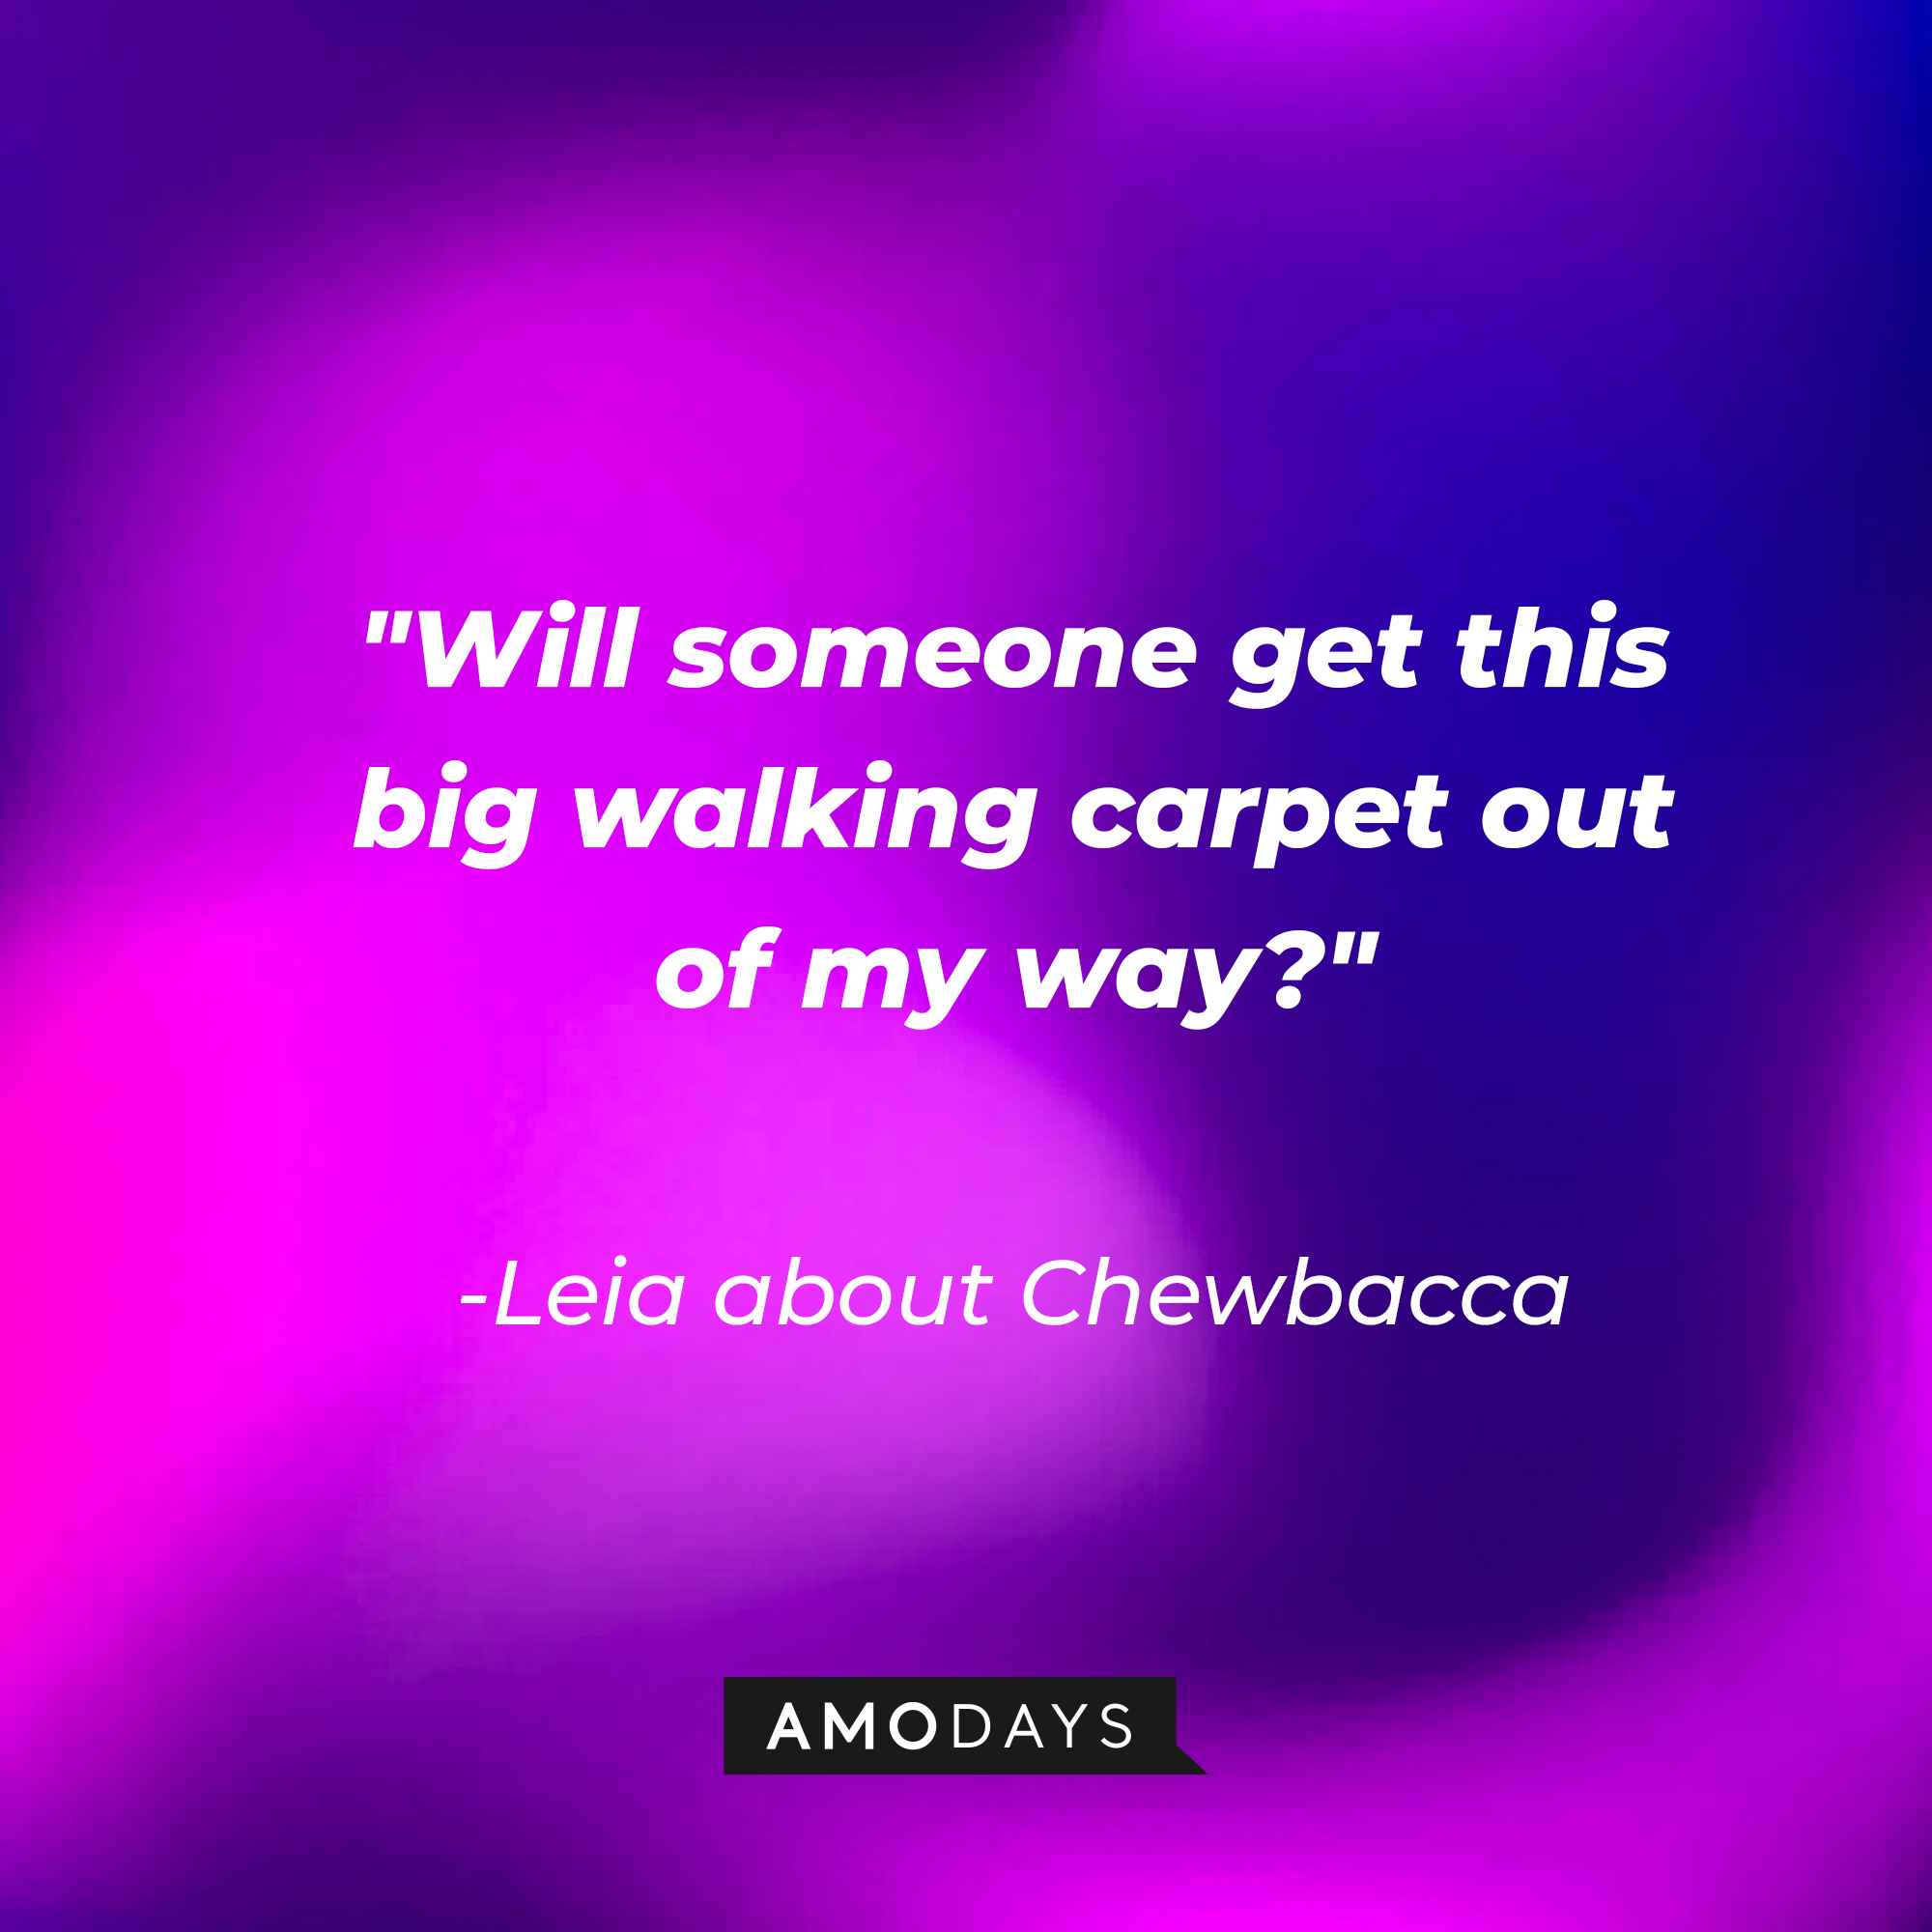 Leia's quote about Chewbacca: "Will someone get this big walking carpet out of my way?" | Source: AmoDays